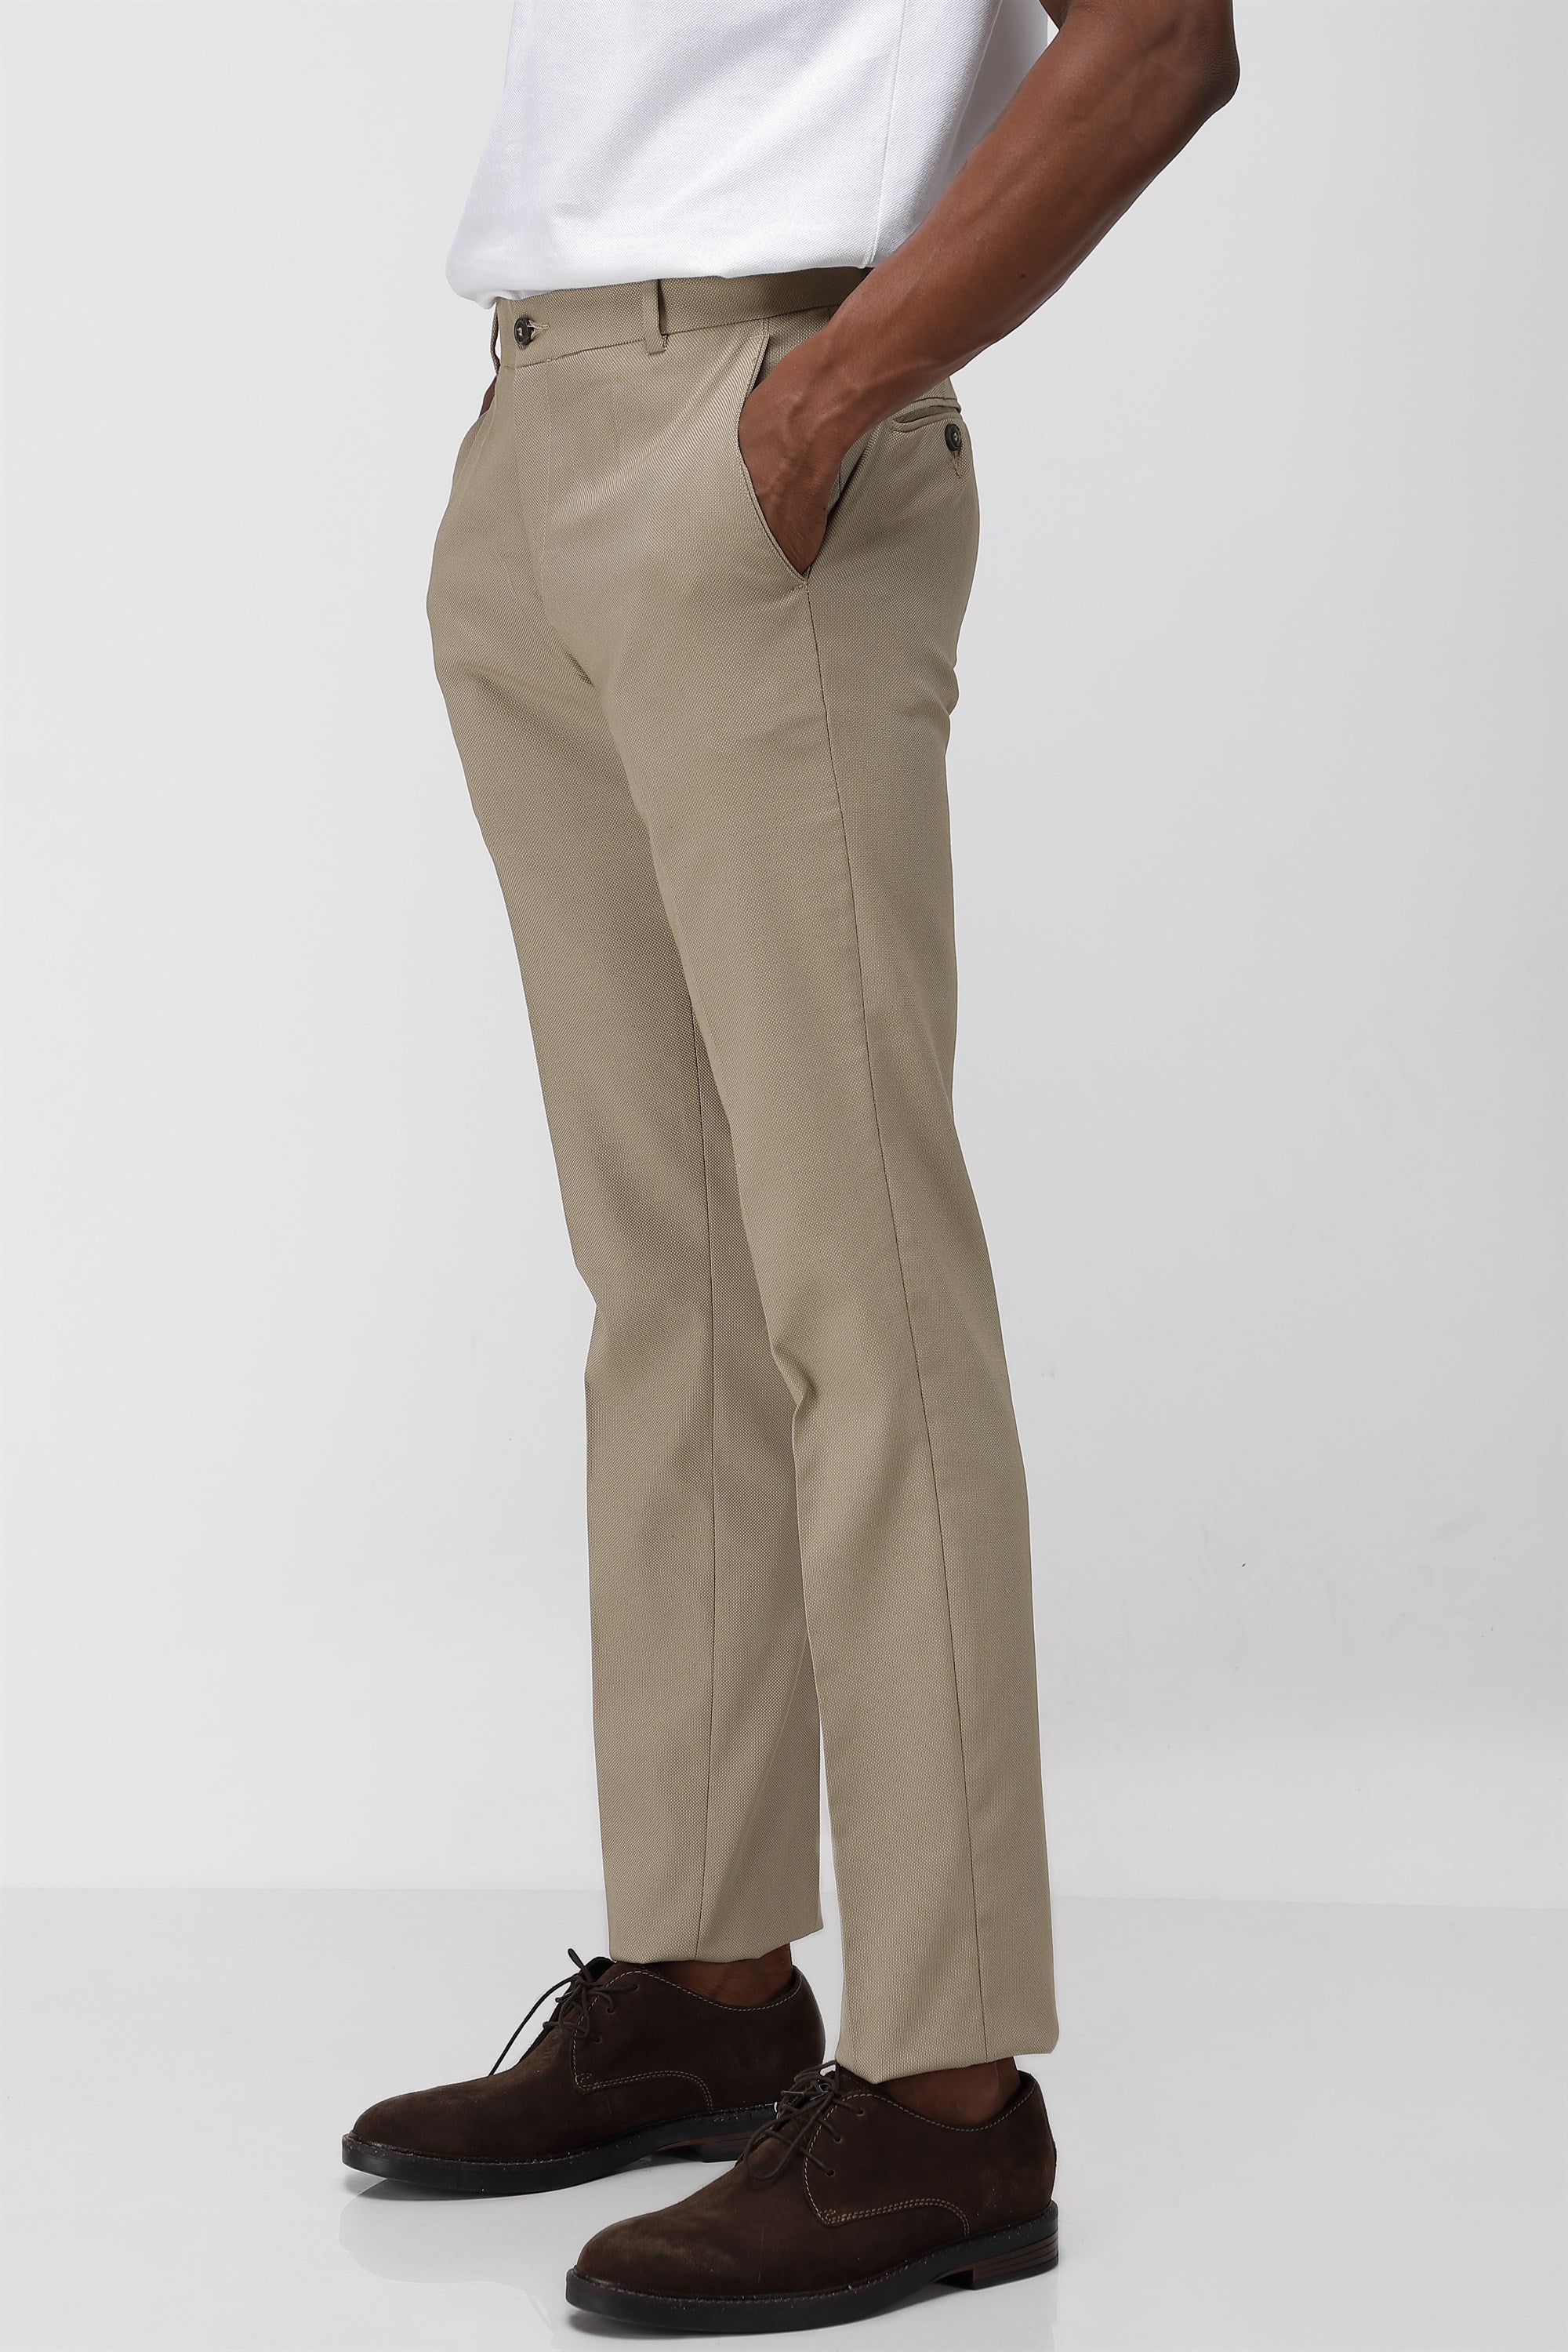 T the brand Stretch Formal Textured Trouser - Khaki